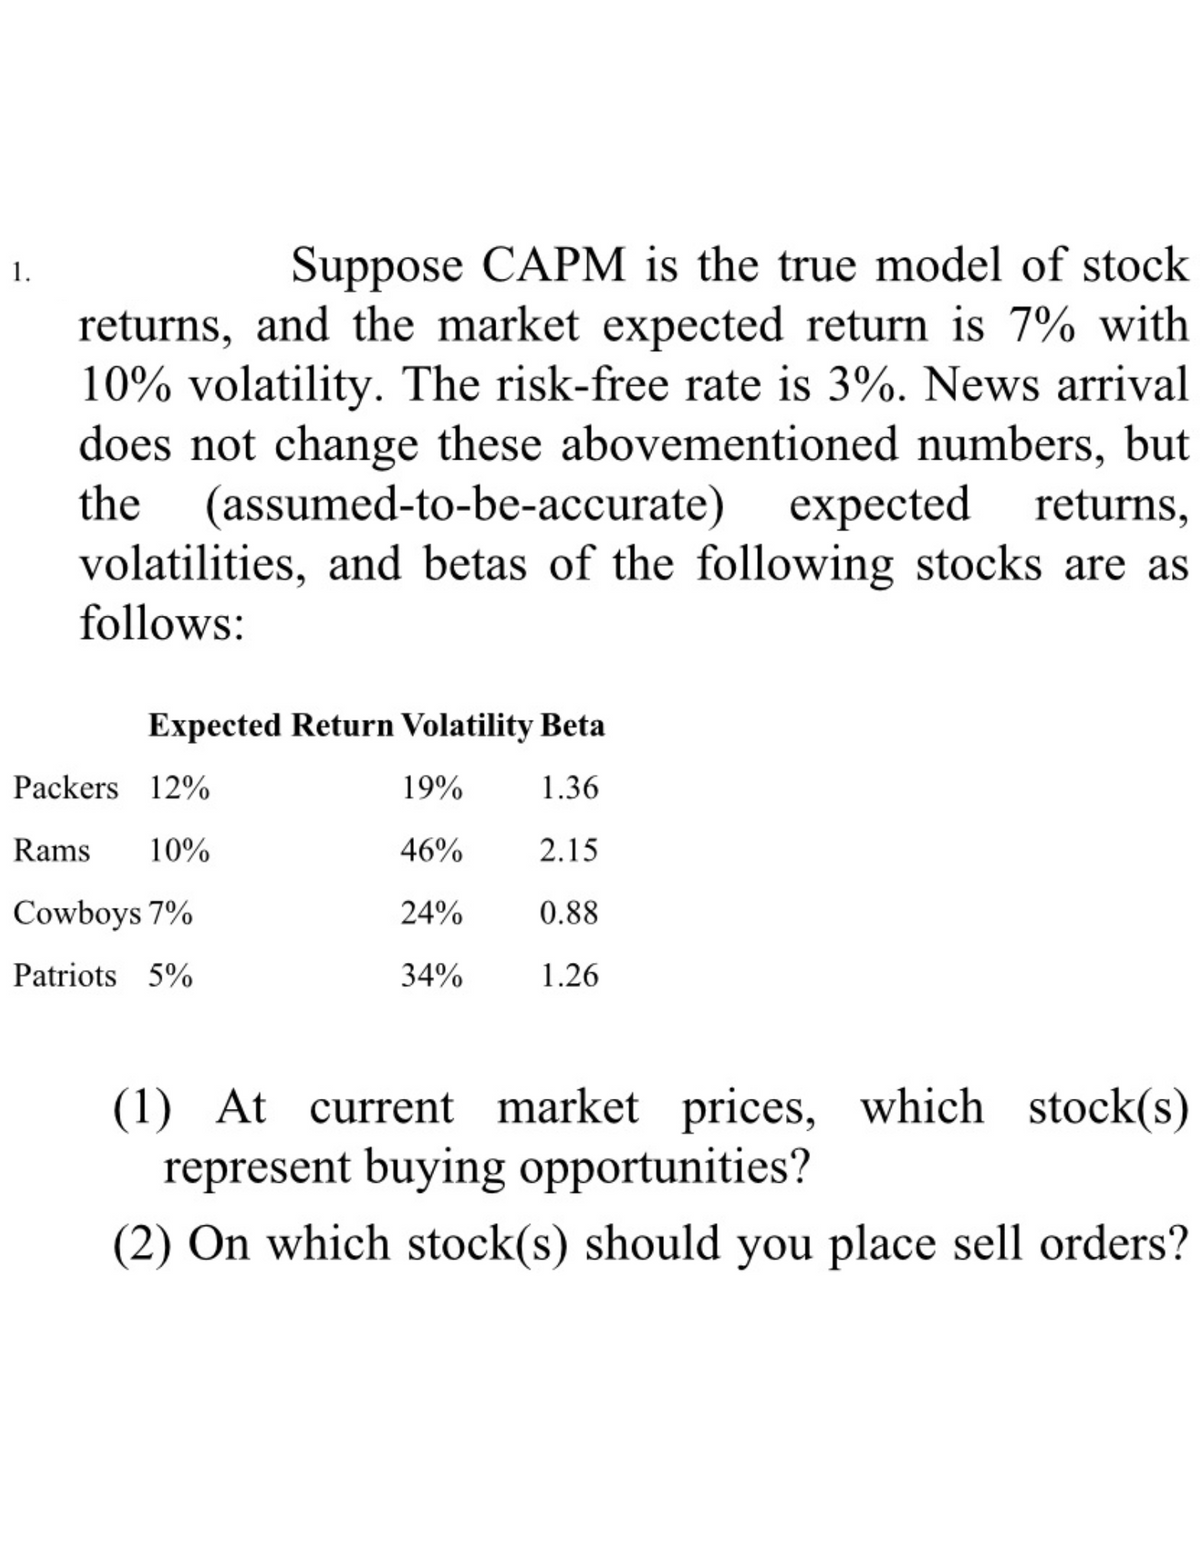 1.
Suppose CAPM is the true model of stock
returns, and the market expected return is 7% with
10% volatility. The risk-free rate is 3%. News arrival
does not change these abovementioned numbers, but
the (assumed-to-be-accurate) expected returns,
volatilities, and betas of the following stocks are as
follows:
Expected Return Volatility Beta
Packers 12%
19%
1.36
Rams 10%
46%
2.15
Cowboys 7%
24%
0.88
Patriots 5%
34%
1.26
(1) At current market prices, which stock(s)
represent buying opportunities?
(2) On which stock(s) should you place sell orders?